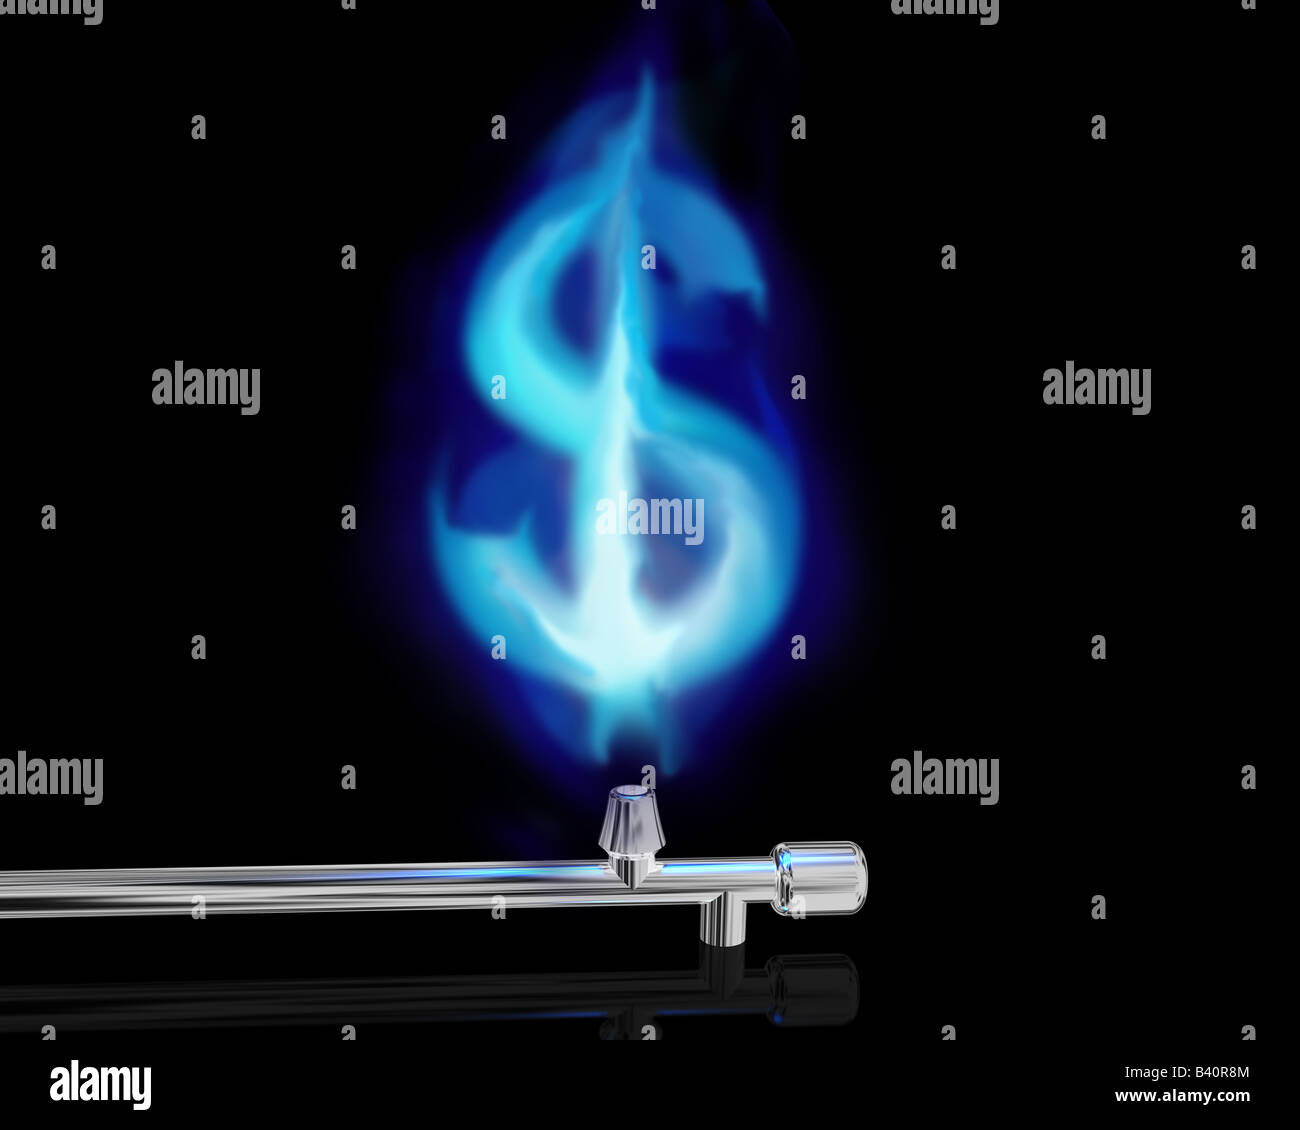 Illustration of a blue gas flame in the form of a dollar symbol Stock Photo